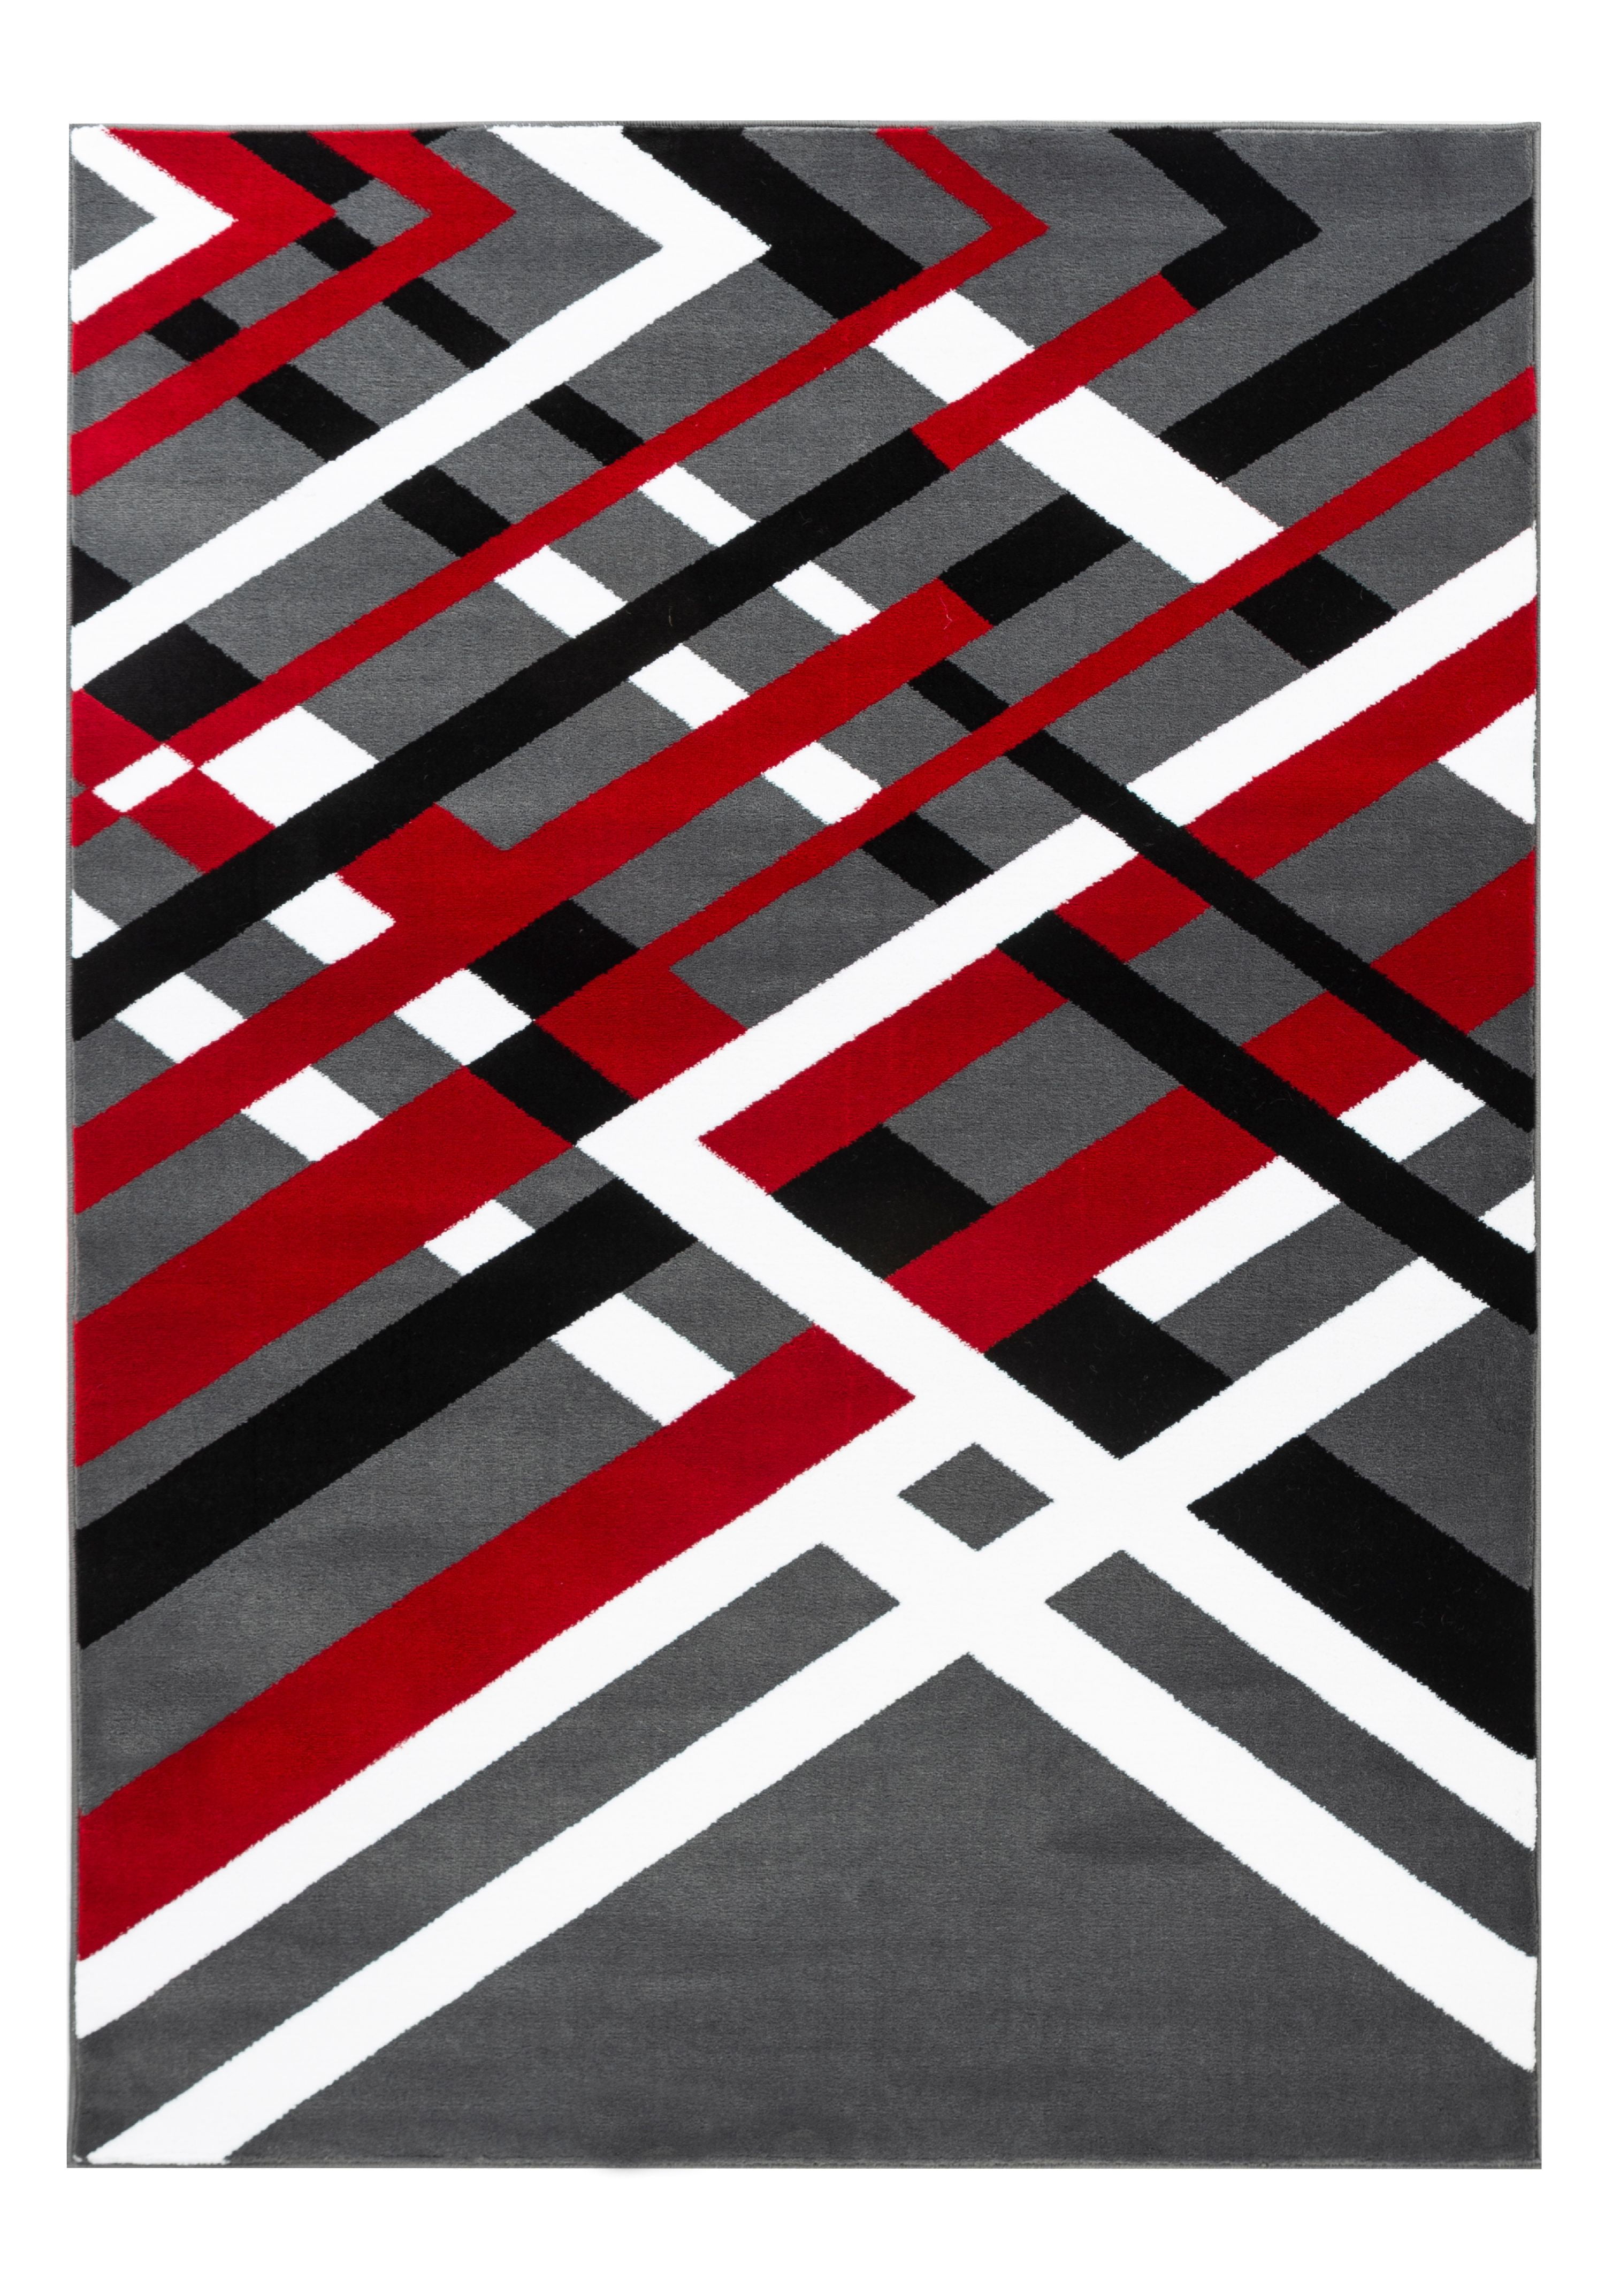 MODERN  SMALL MEDIUM LARGE RED BLACK CHAIN PATTERN CHEAP AND BEST QUALITY RUGS 